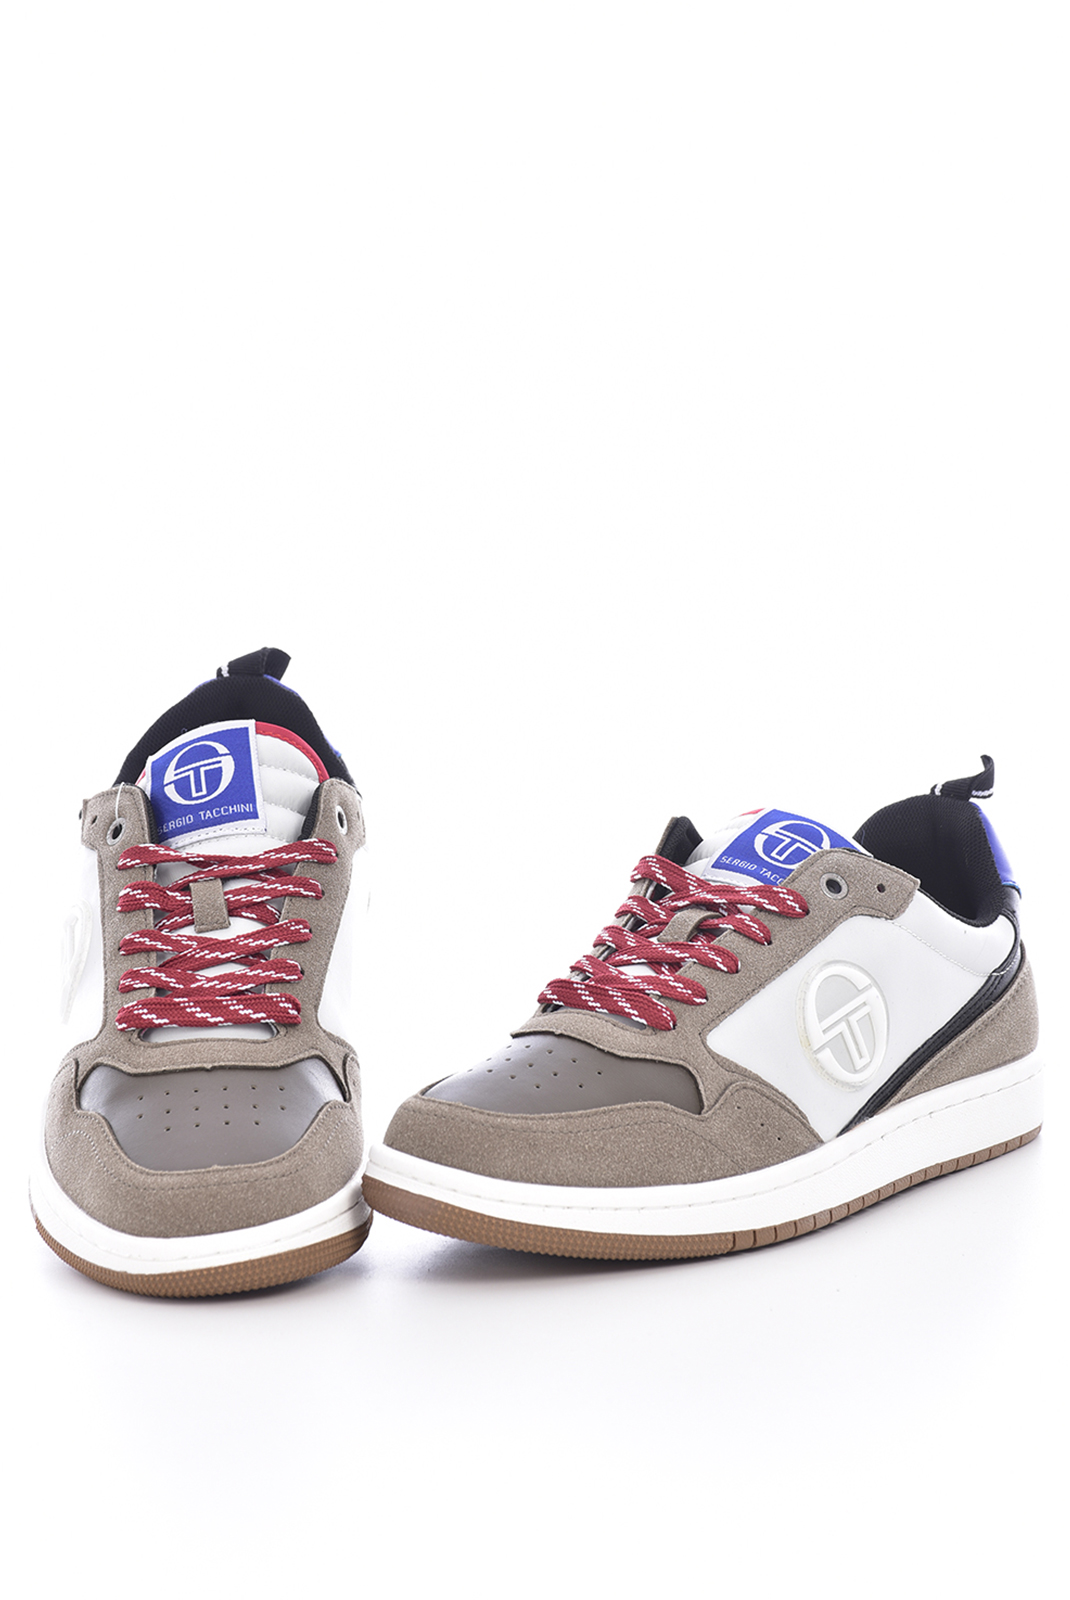 Chaussure caribou gray homme Sergio Tacchini - Stm928210